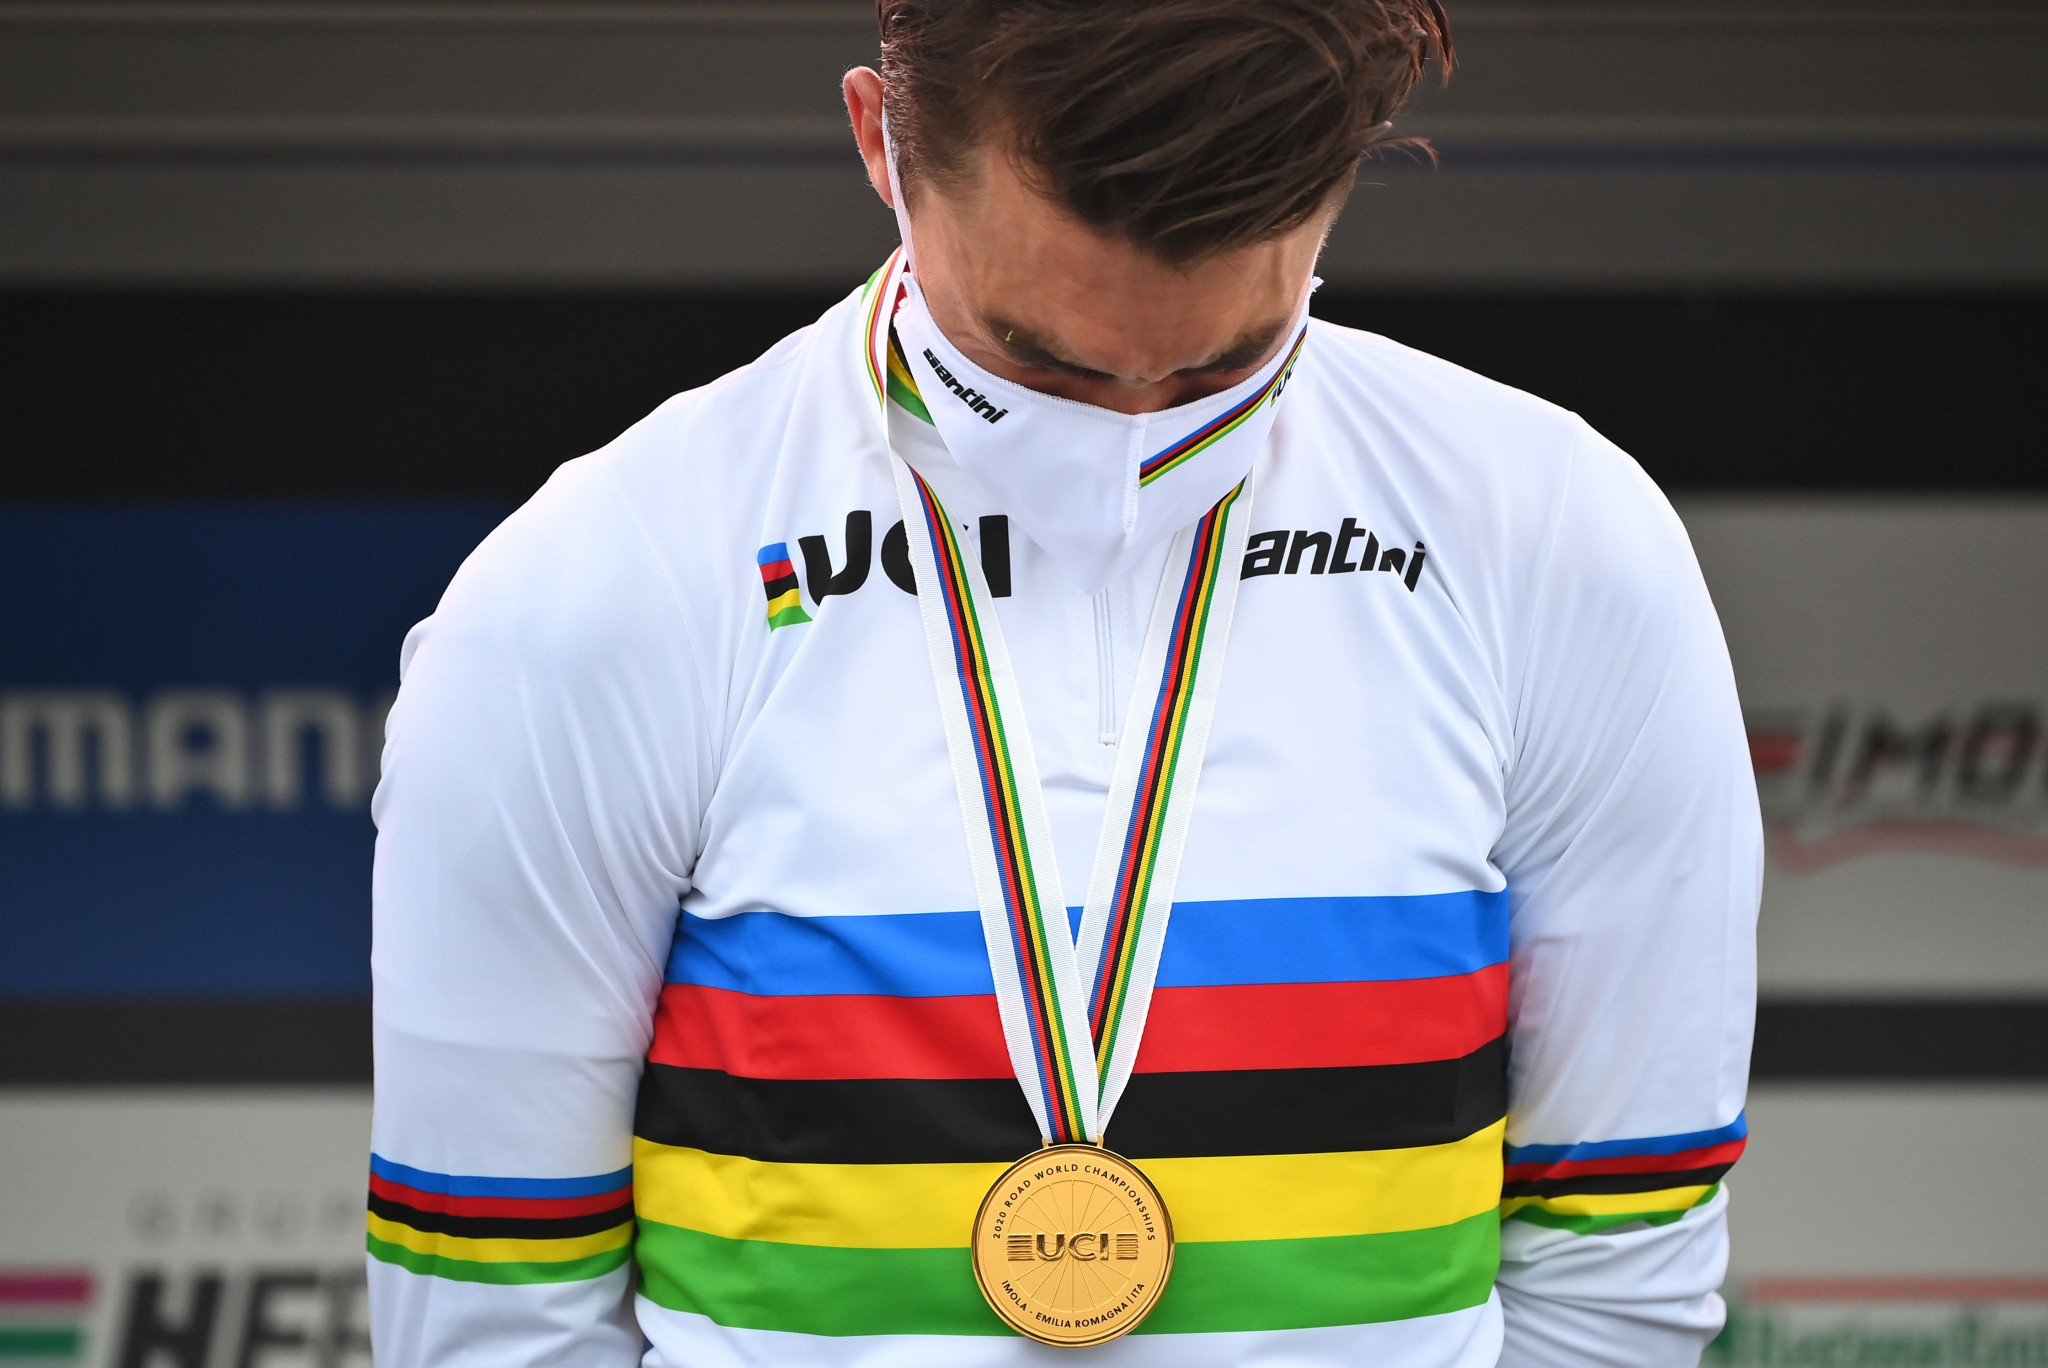 Products will feature the rainbow symbol of the UCI World Championships ©Getty Images